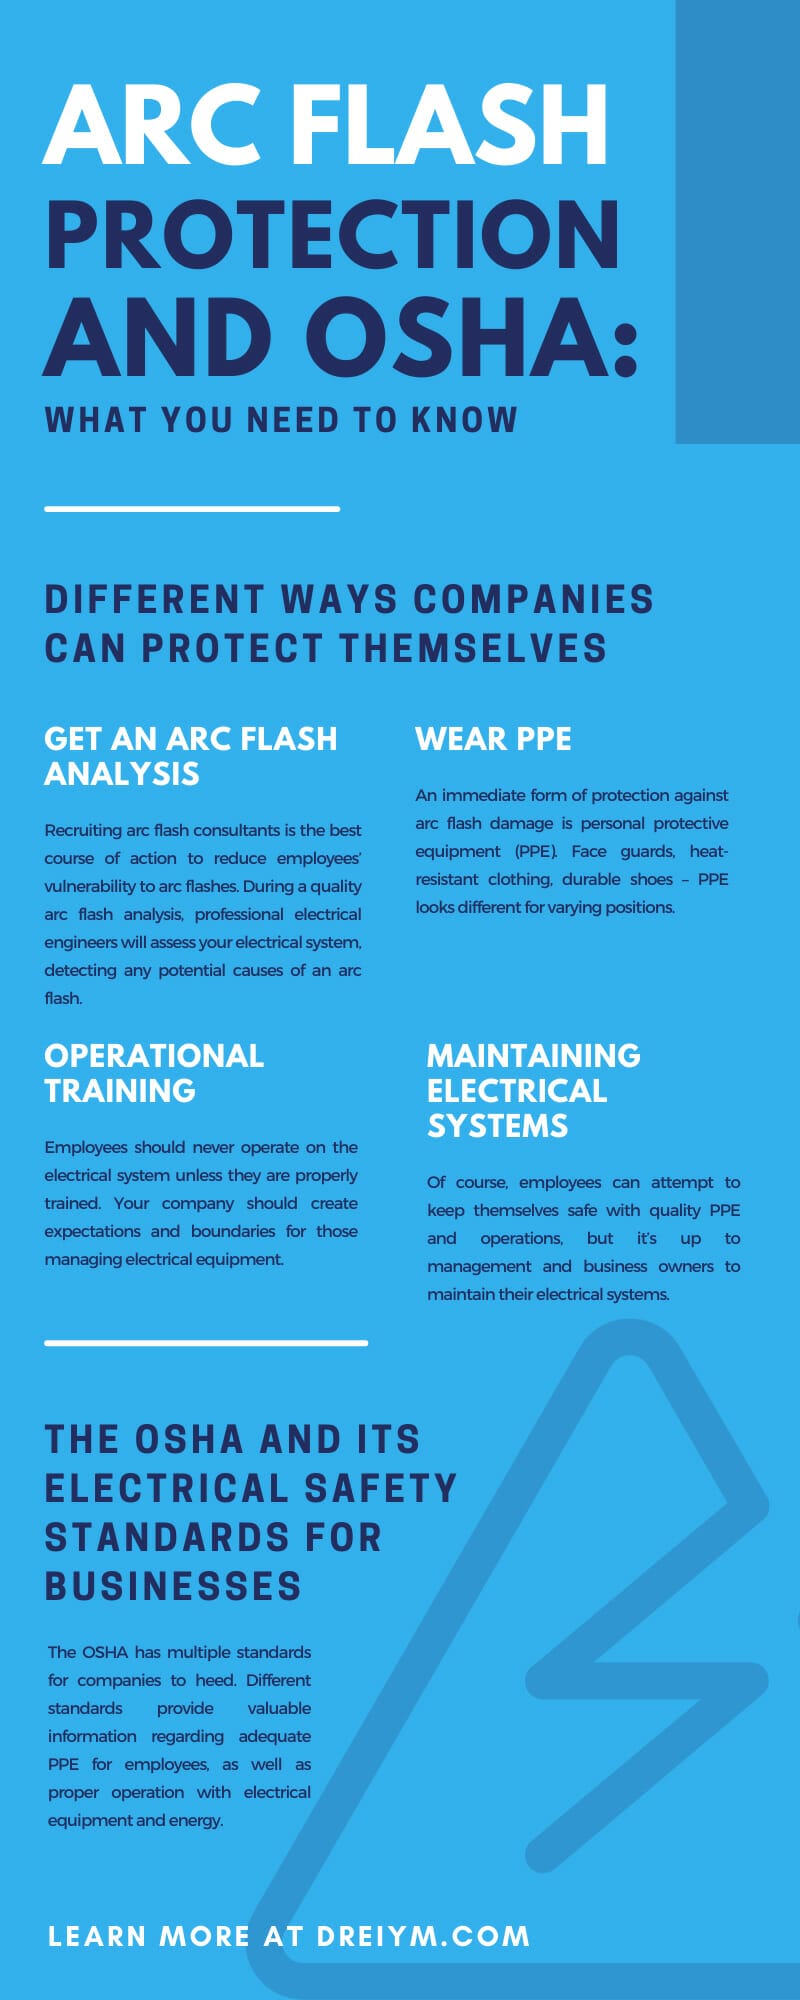 Arc Flash Protection and OSHA: What You Need To Know